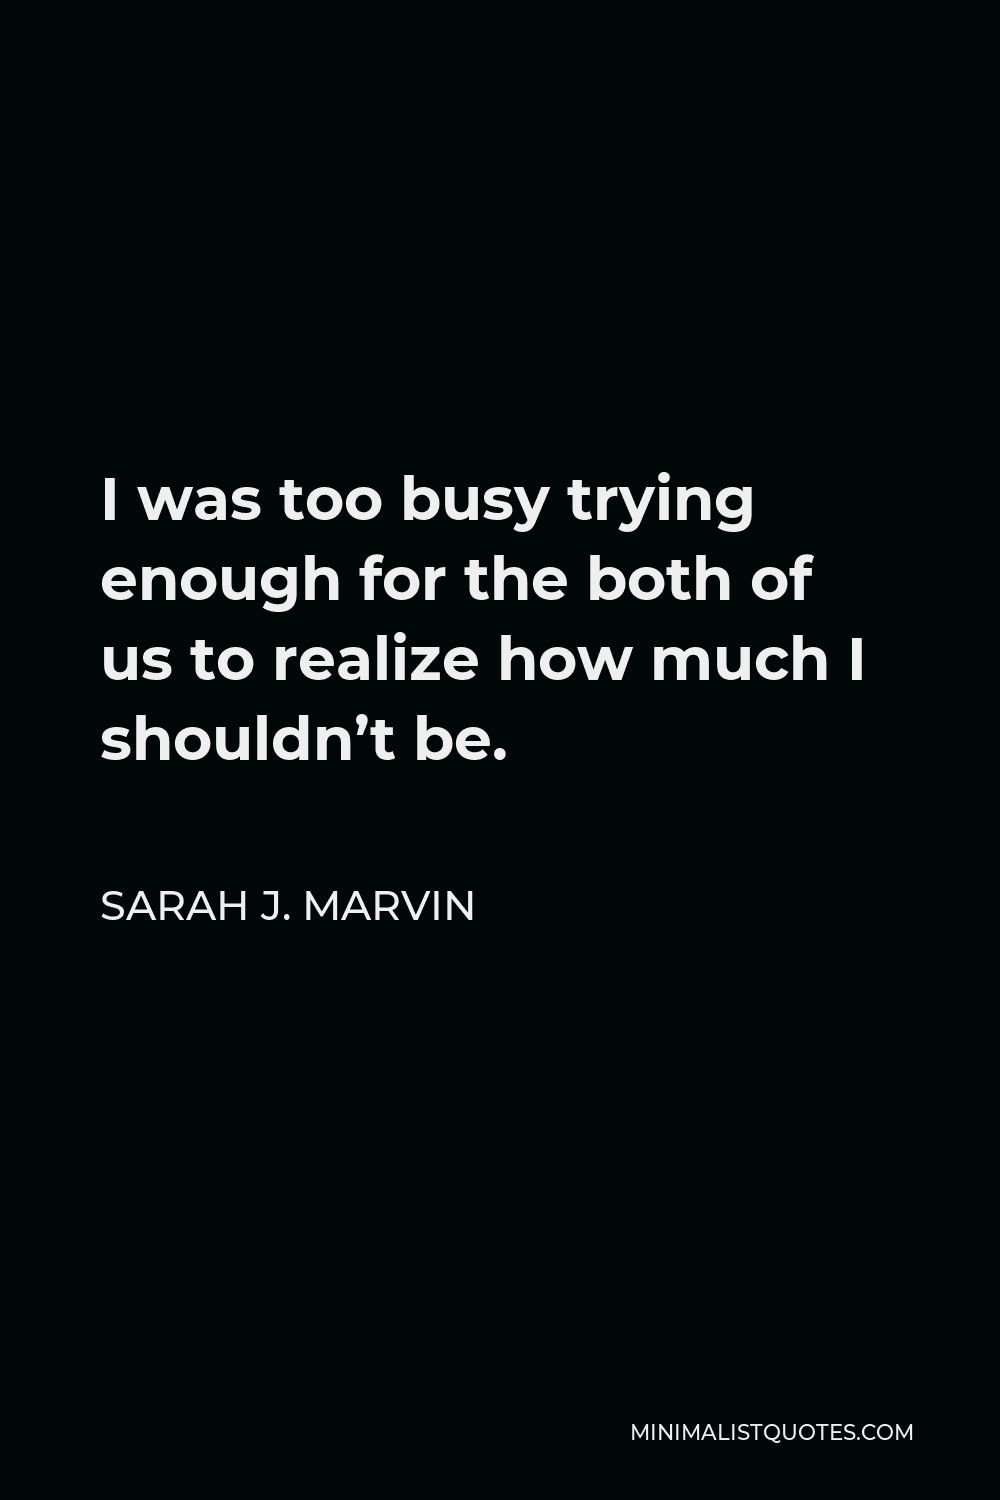 Sarah J. Marvin Quote - I was too busy trying enough for the both of us to realize how much I shouldn’t be.